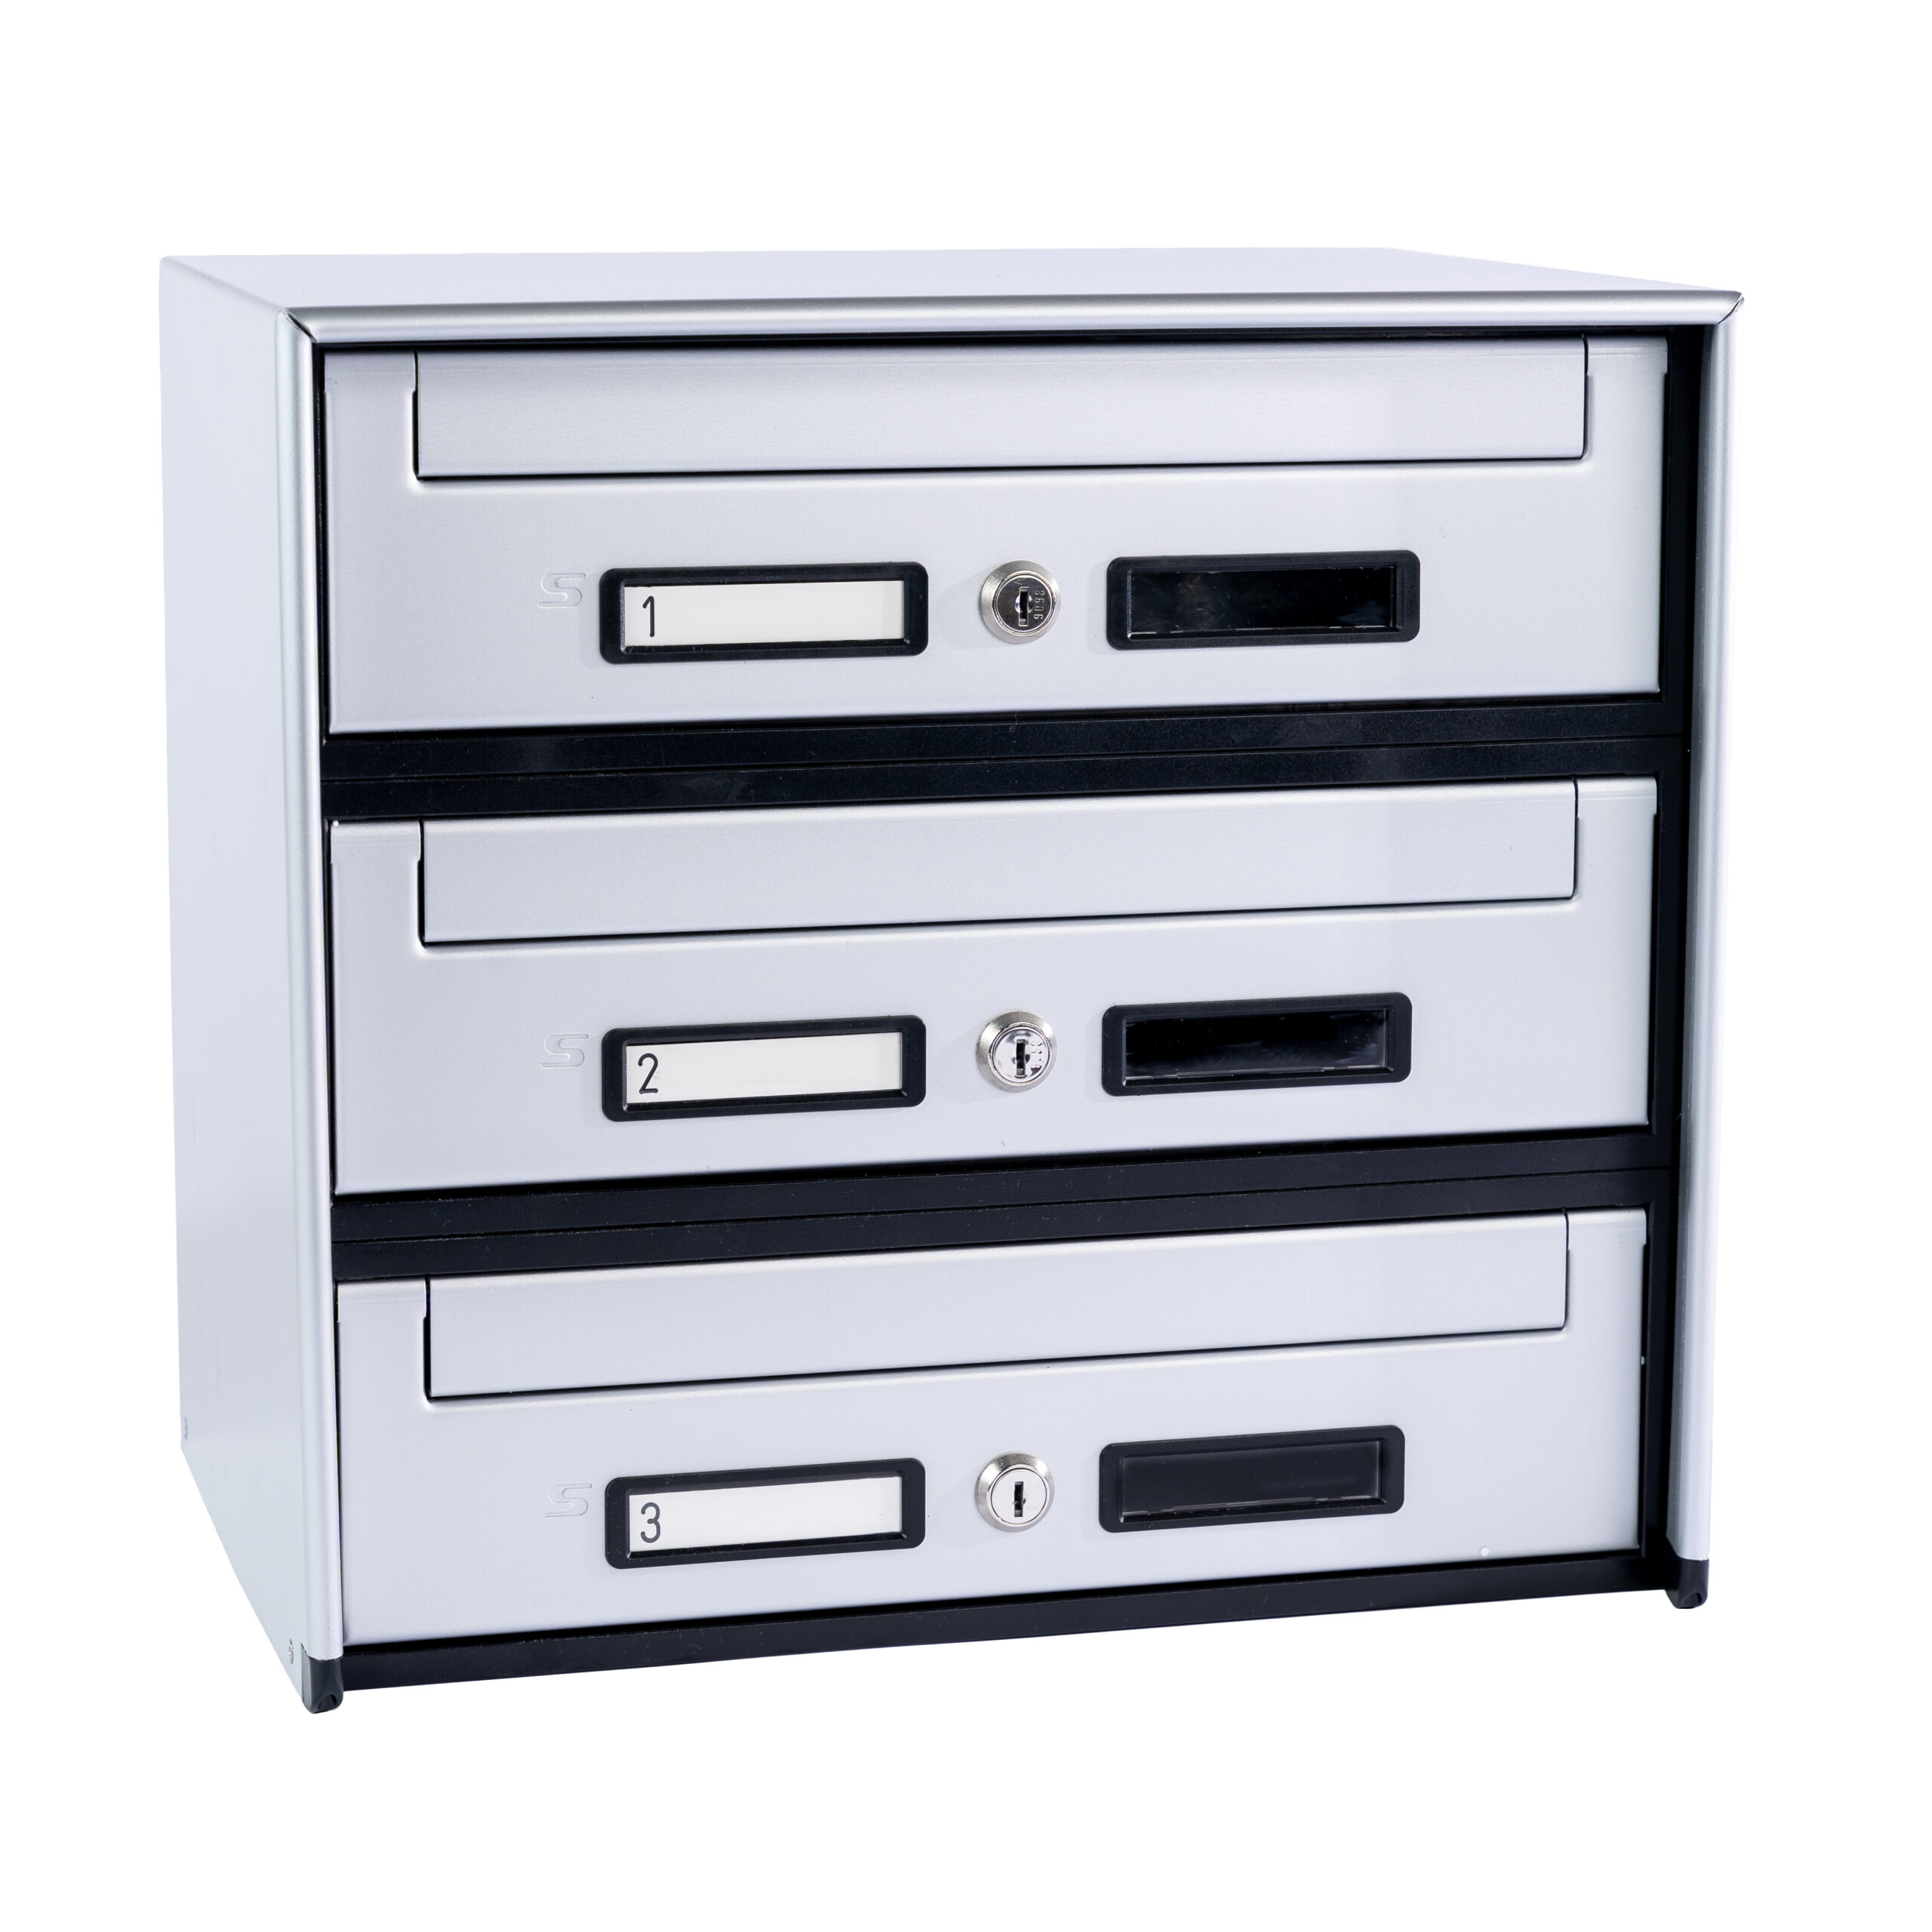 SC5 standard modular letterbox units with front mail collection – 3 mailboxes